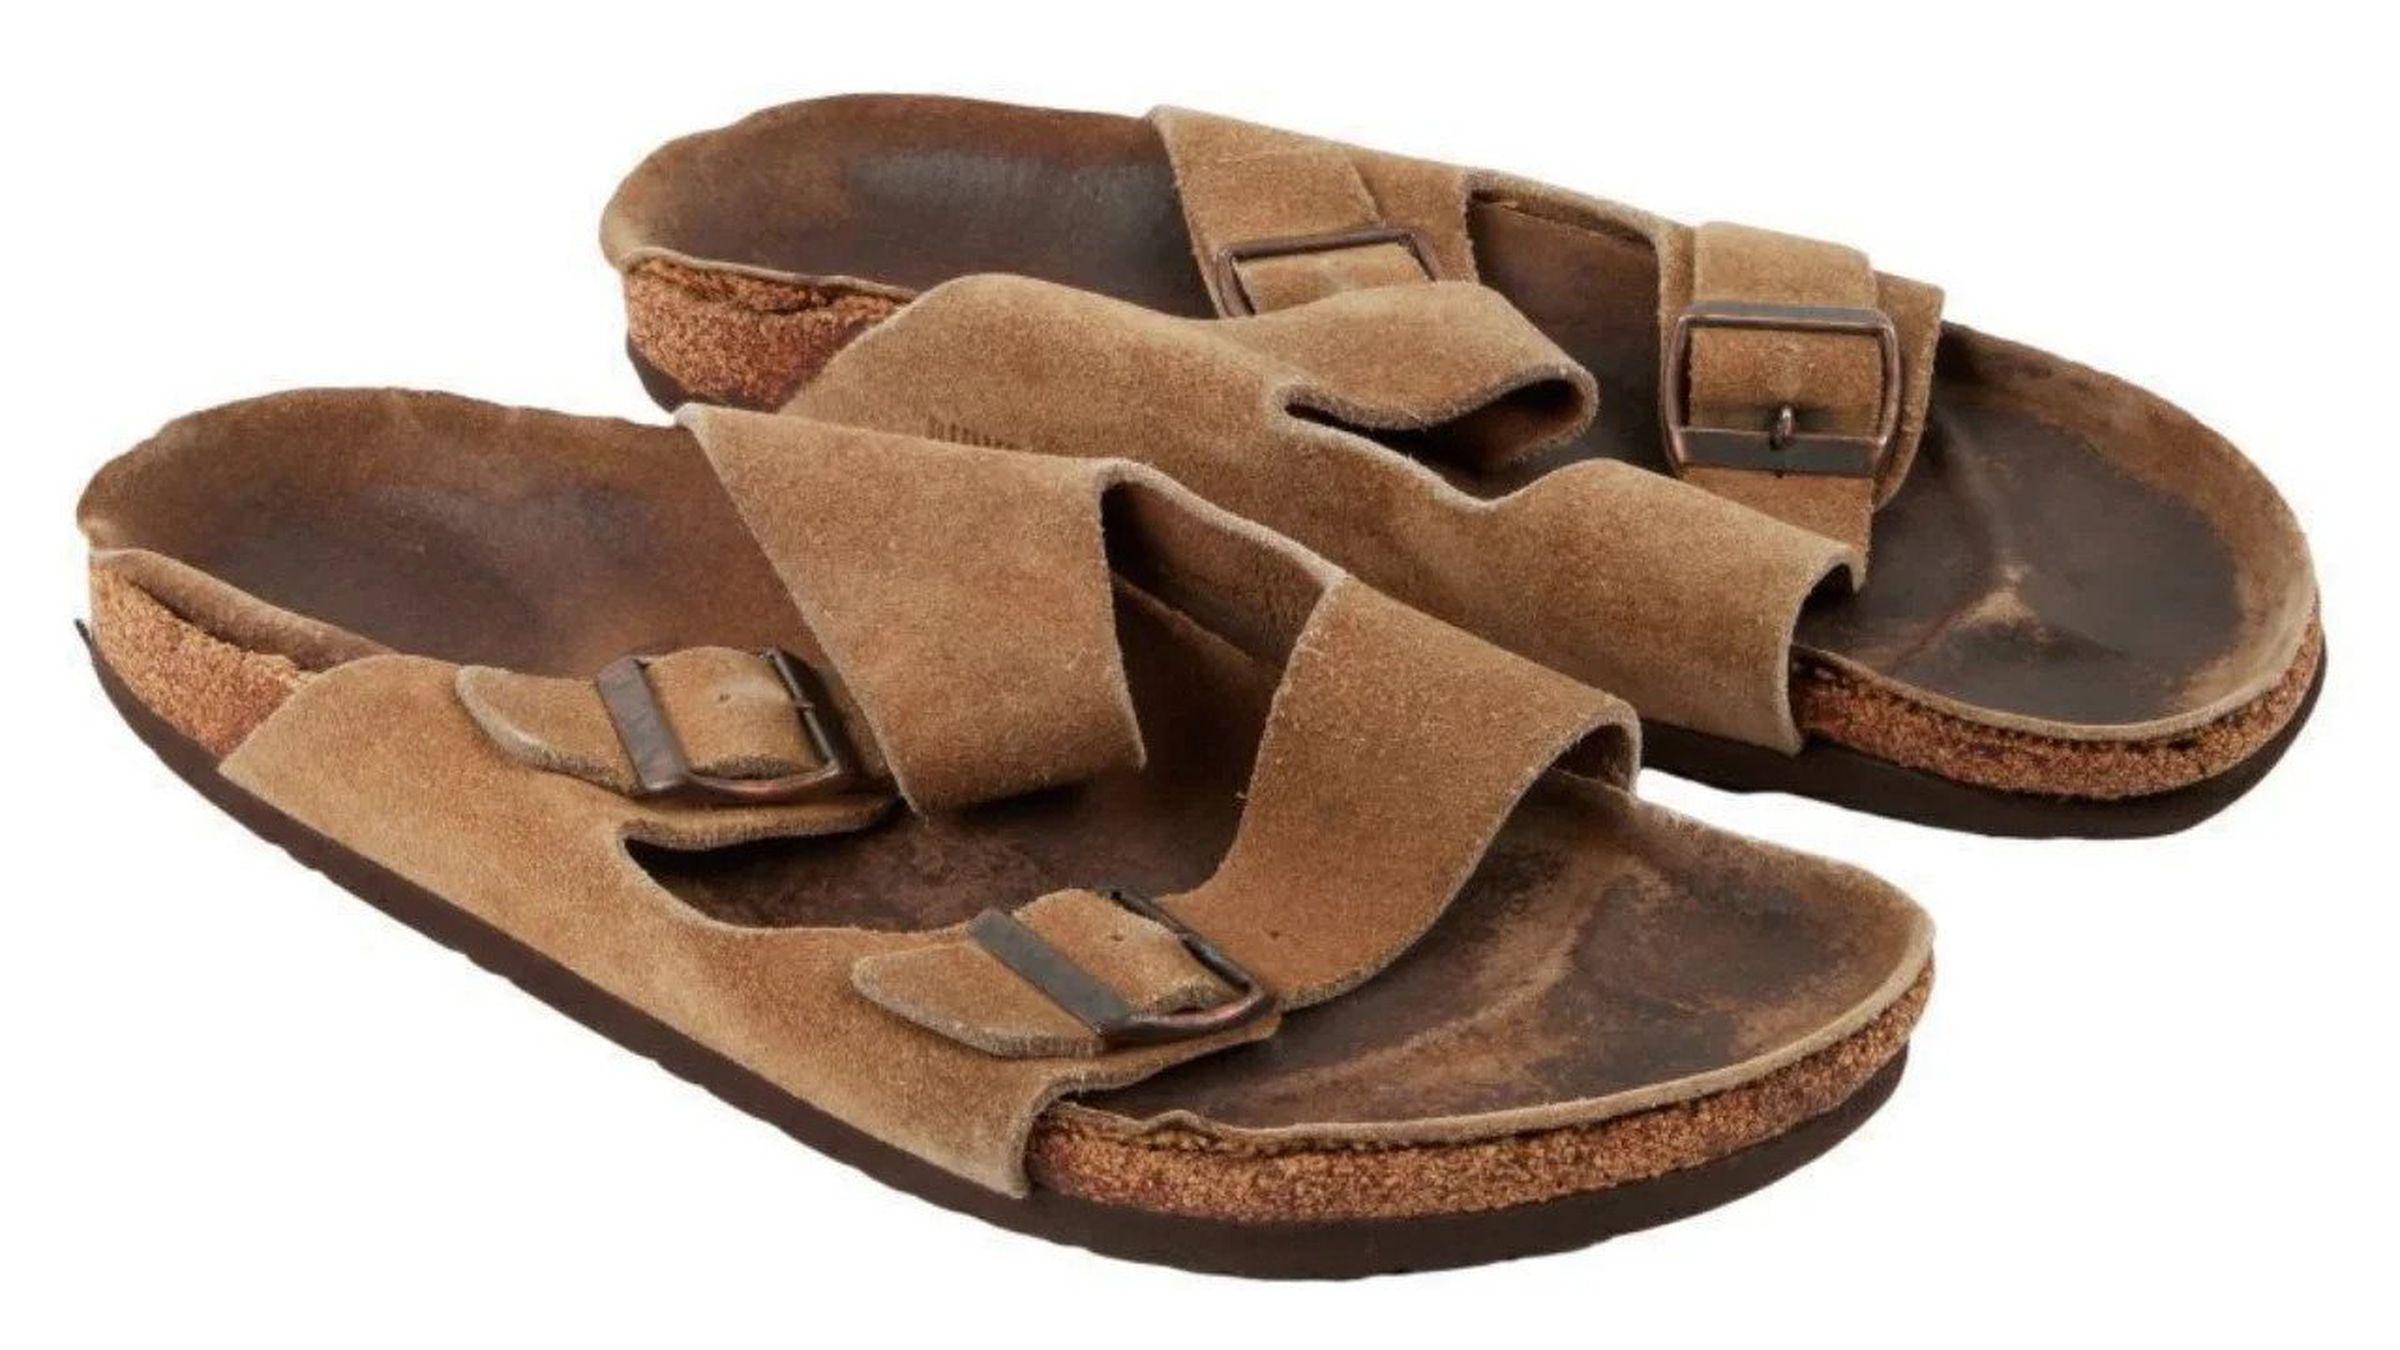 A picture of Steve Jobs used Birkenstock sandals